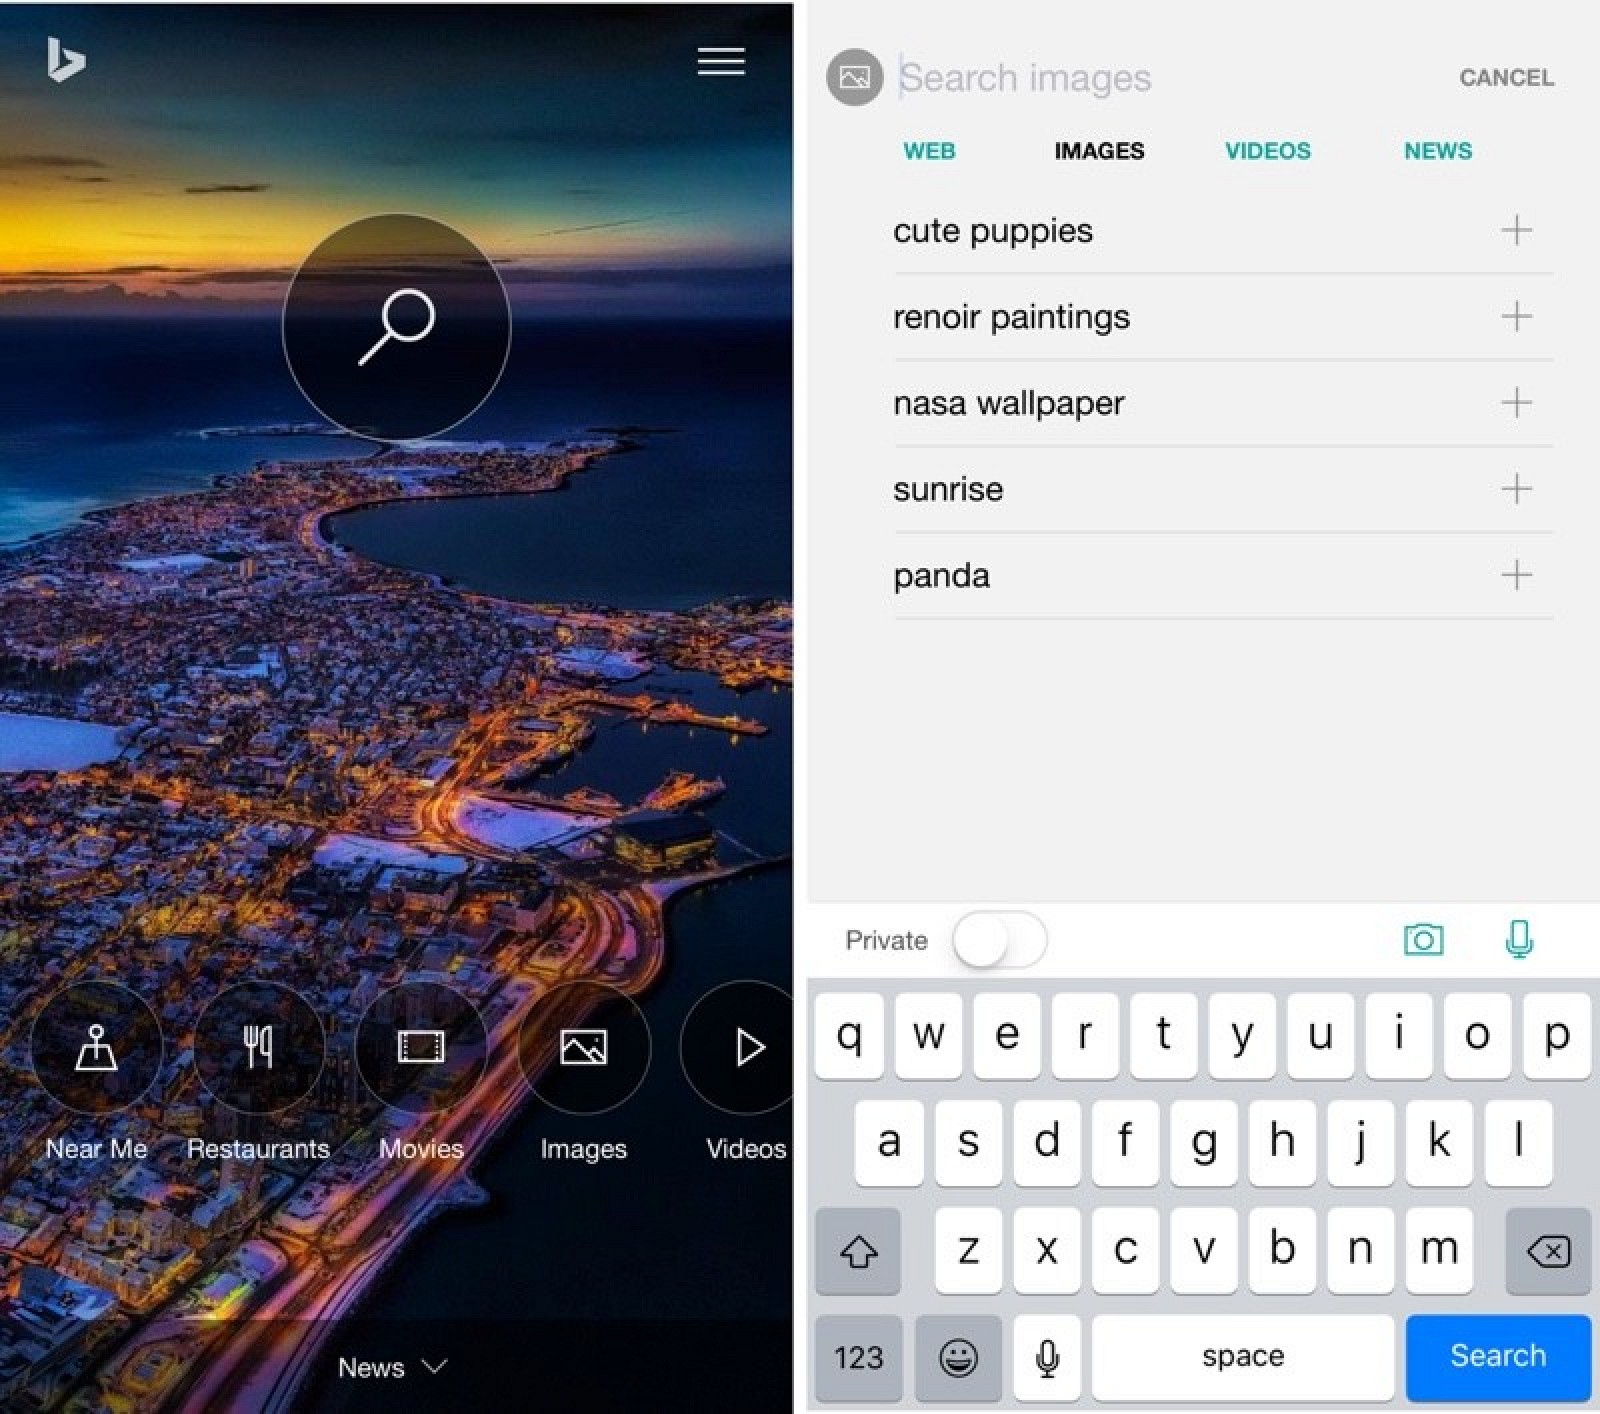 Microsoft Launches Redesigned 'Bing' App With Focus on Quick ...